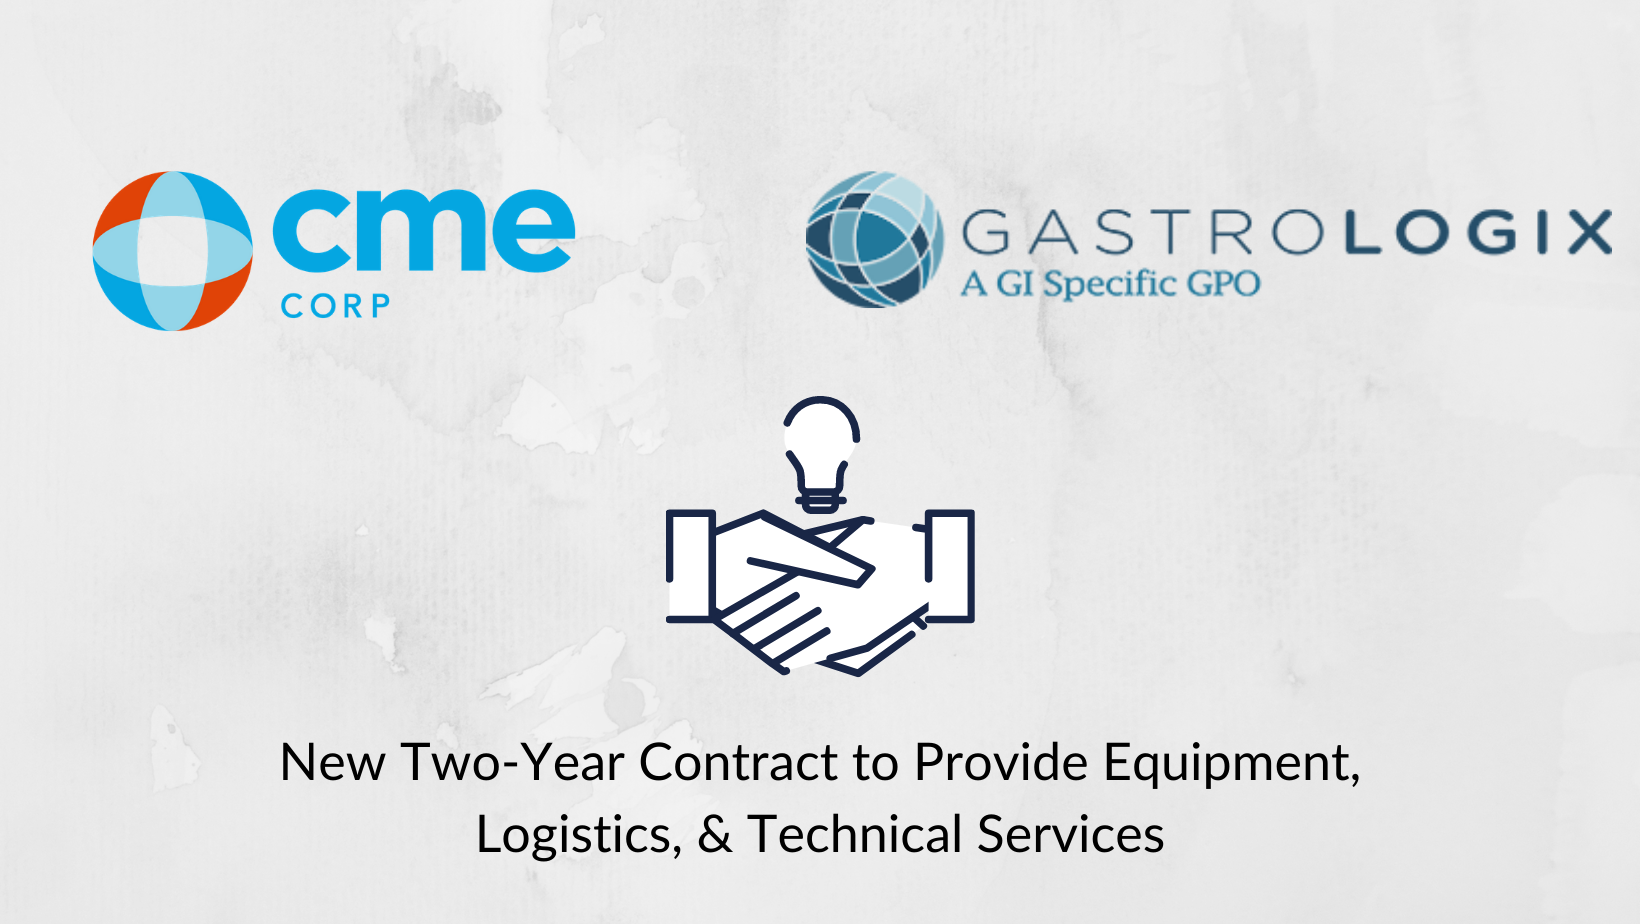 Medical equipment distributor, CME Corp and GPO, Gastrologix have announced their new two-year contract to provide equipment, logistics, and technical services in support of GPO members.